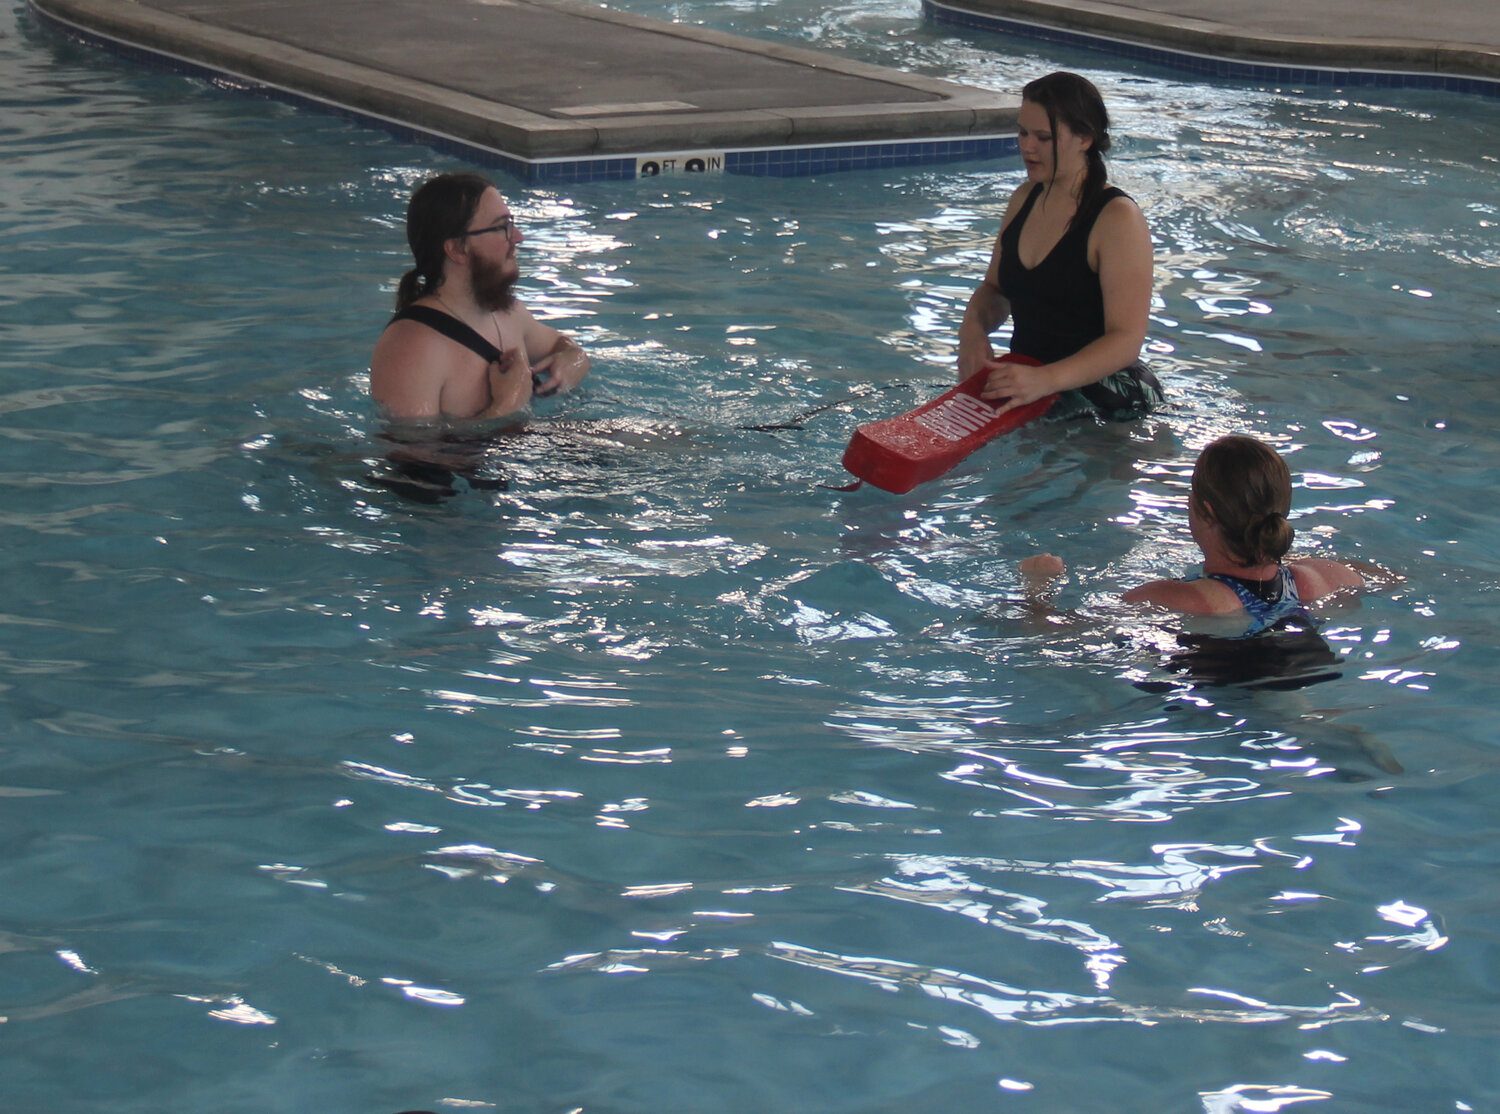 Cole McBride offers instructions to Miakoda Rhodes and Tamara Wurth during lifeguard training class.